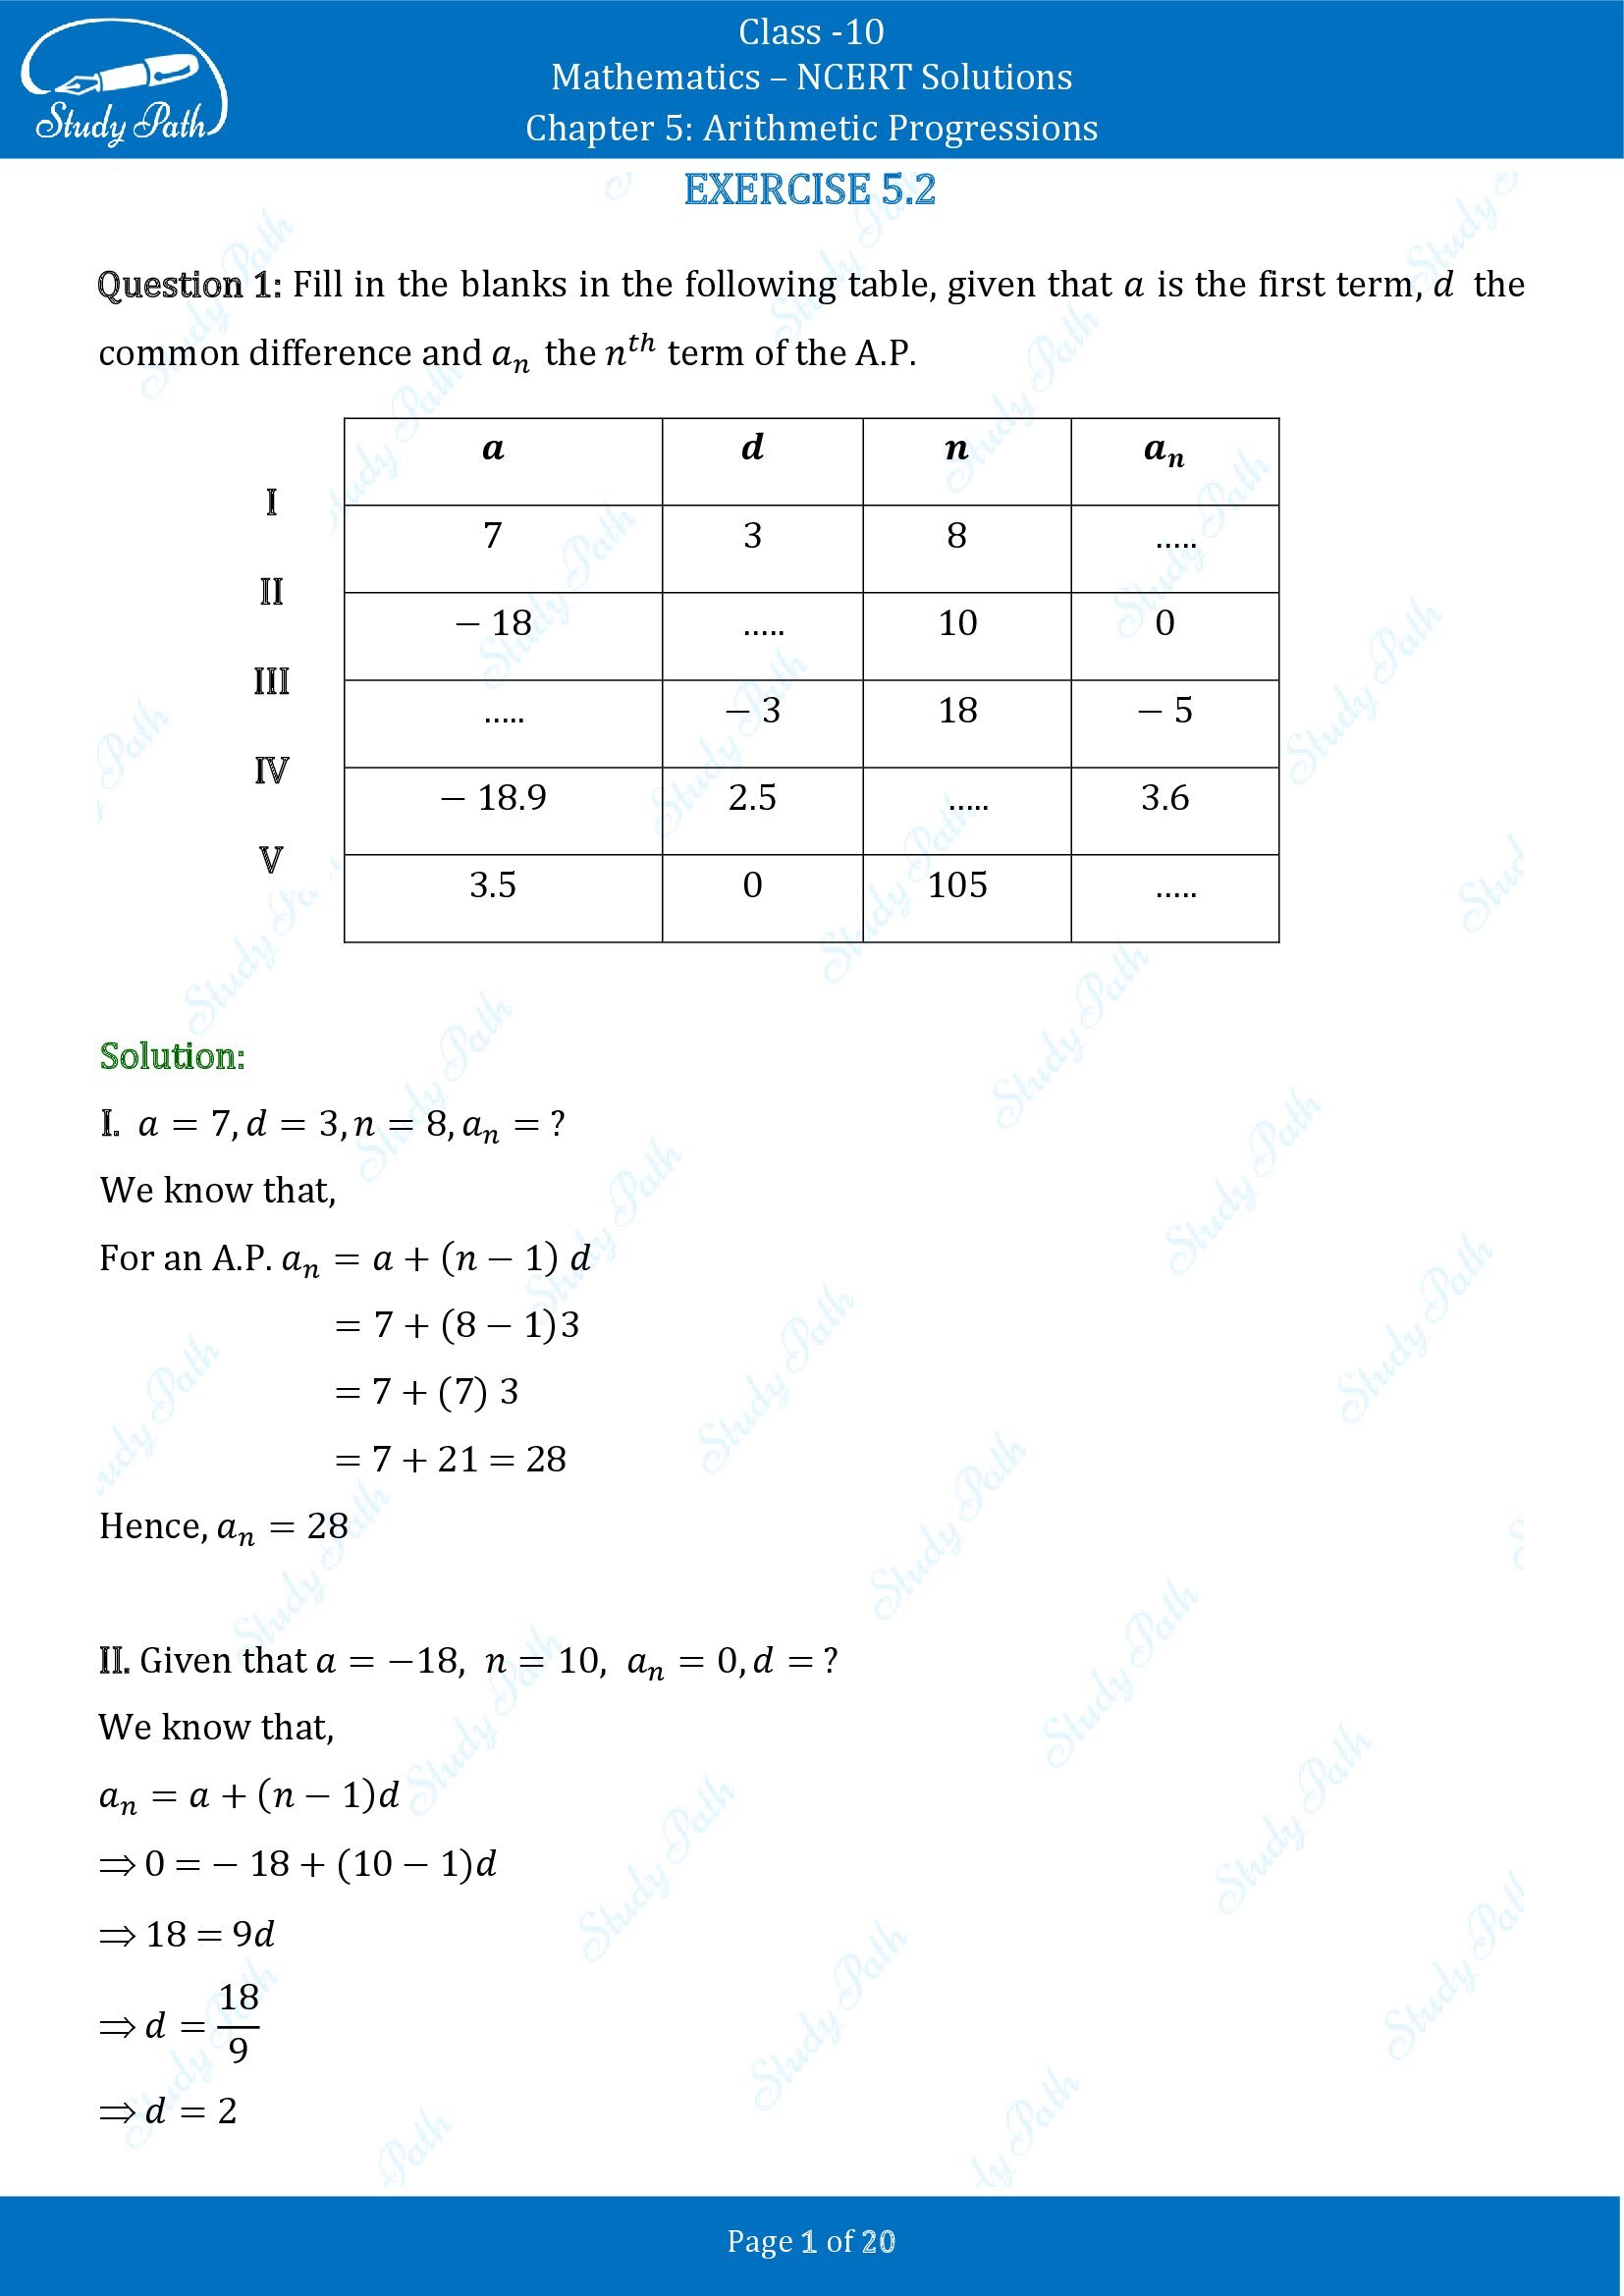 NCERT Solutions for Class 10 Maths Chapter 5 Arithmetic Progressions Exercise 5.2 00001